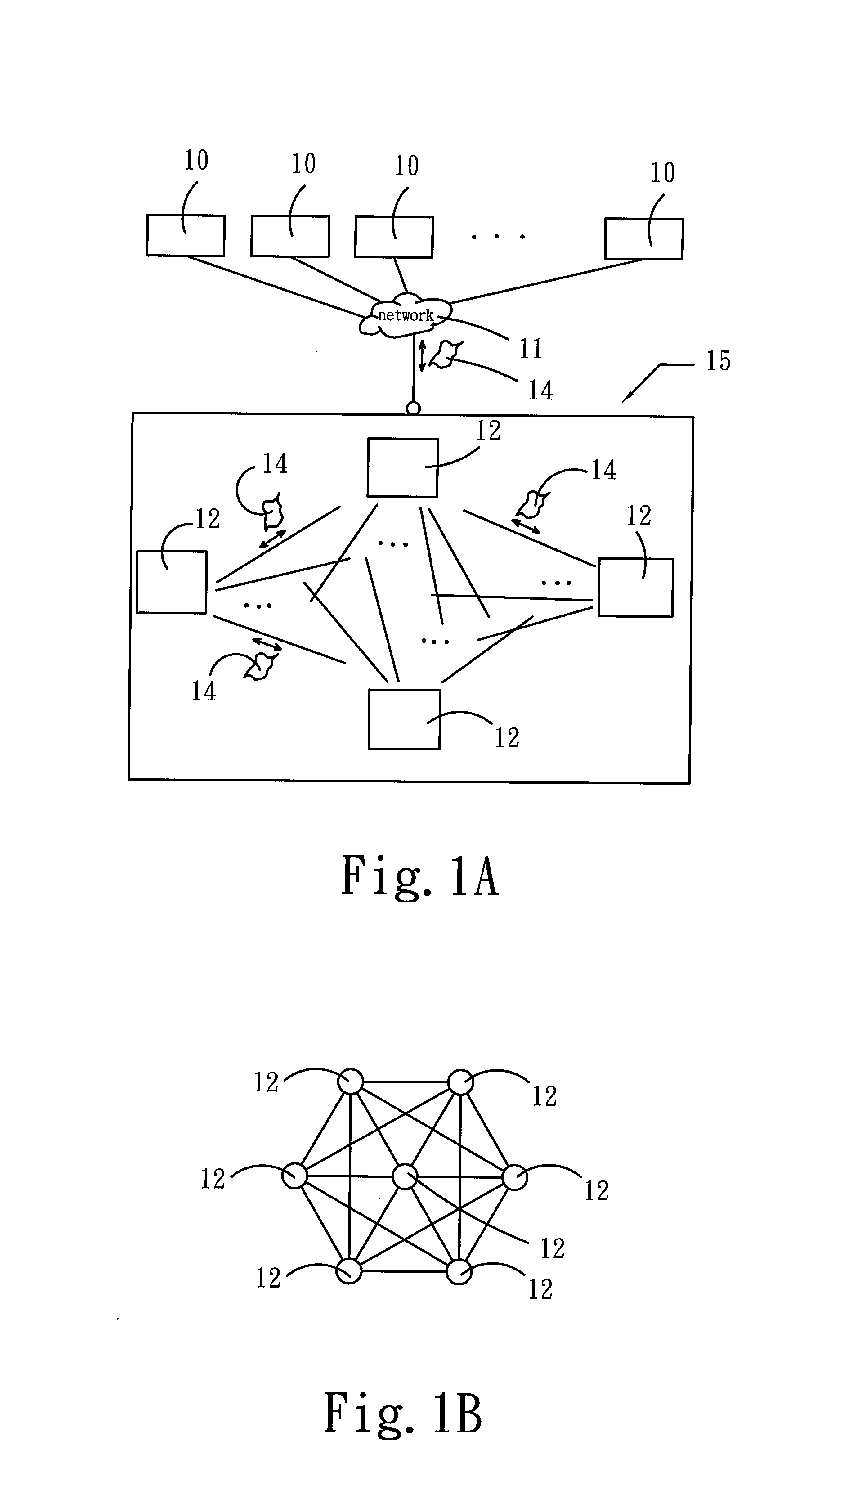 Share memory service system and method of web service oriented applications